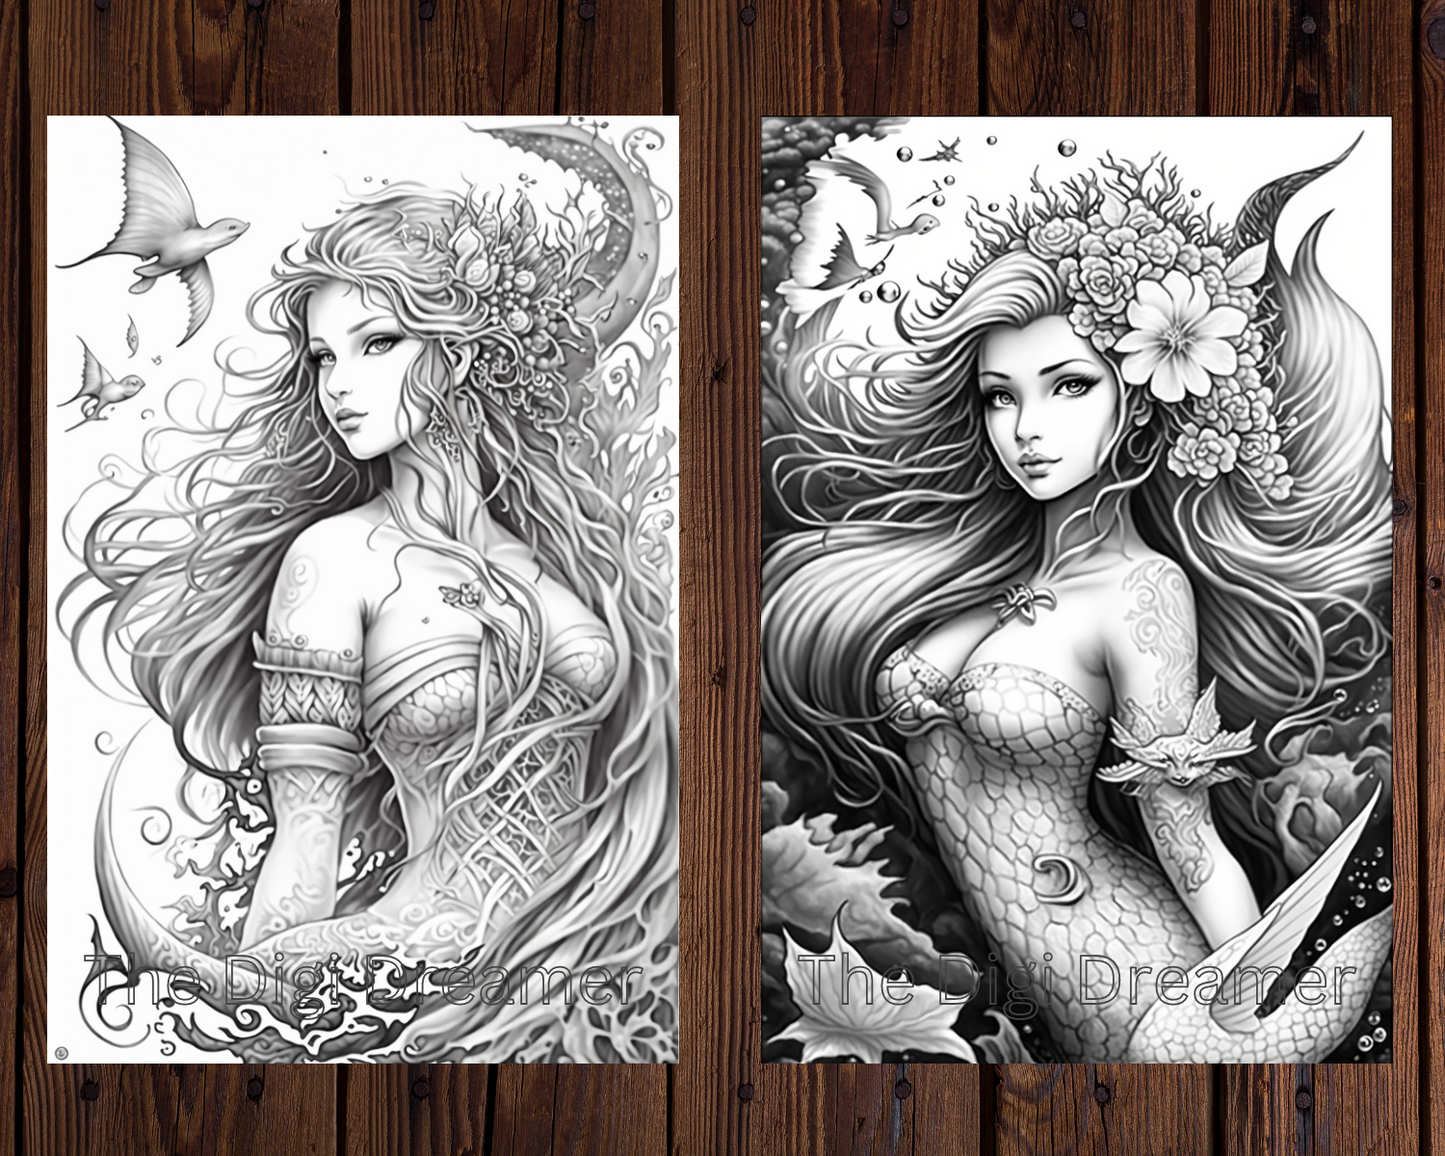 Fantasy Mermaids Grayscale Printable Coloring Pages for Adults